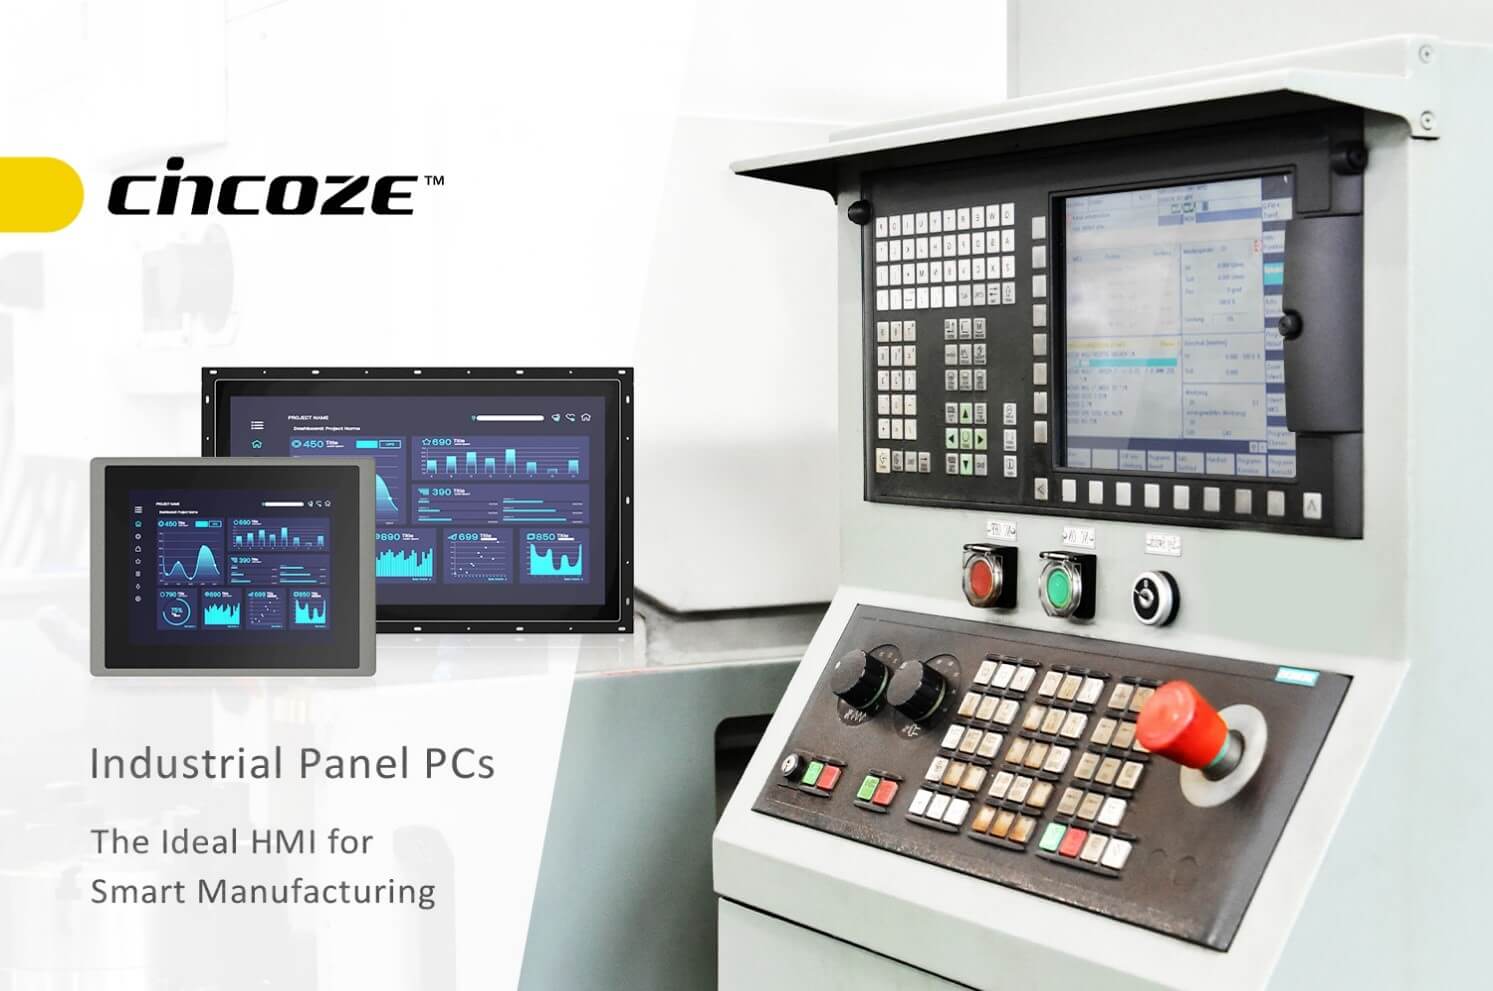 Cincinnati Industrial Tablet PC fully meets the HMI application of smart manufacturing sites